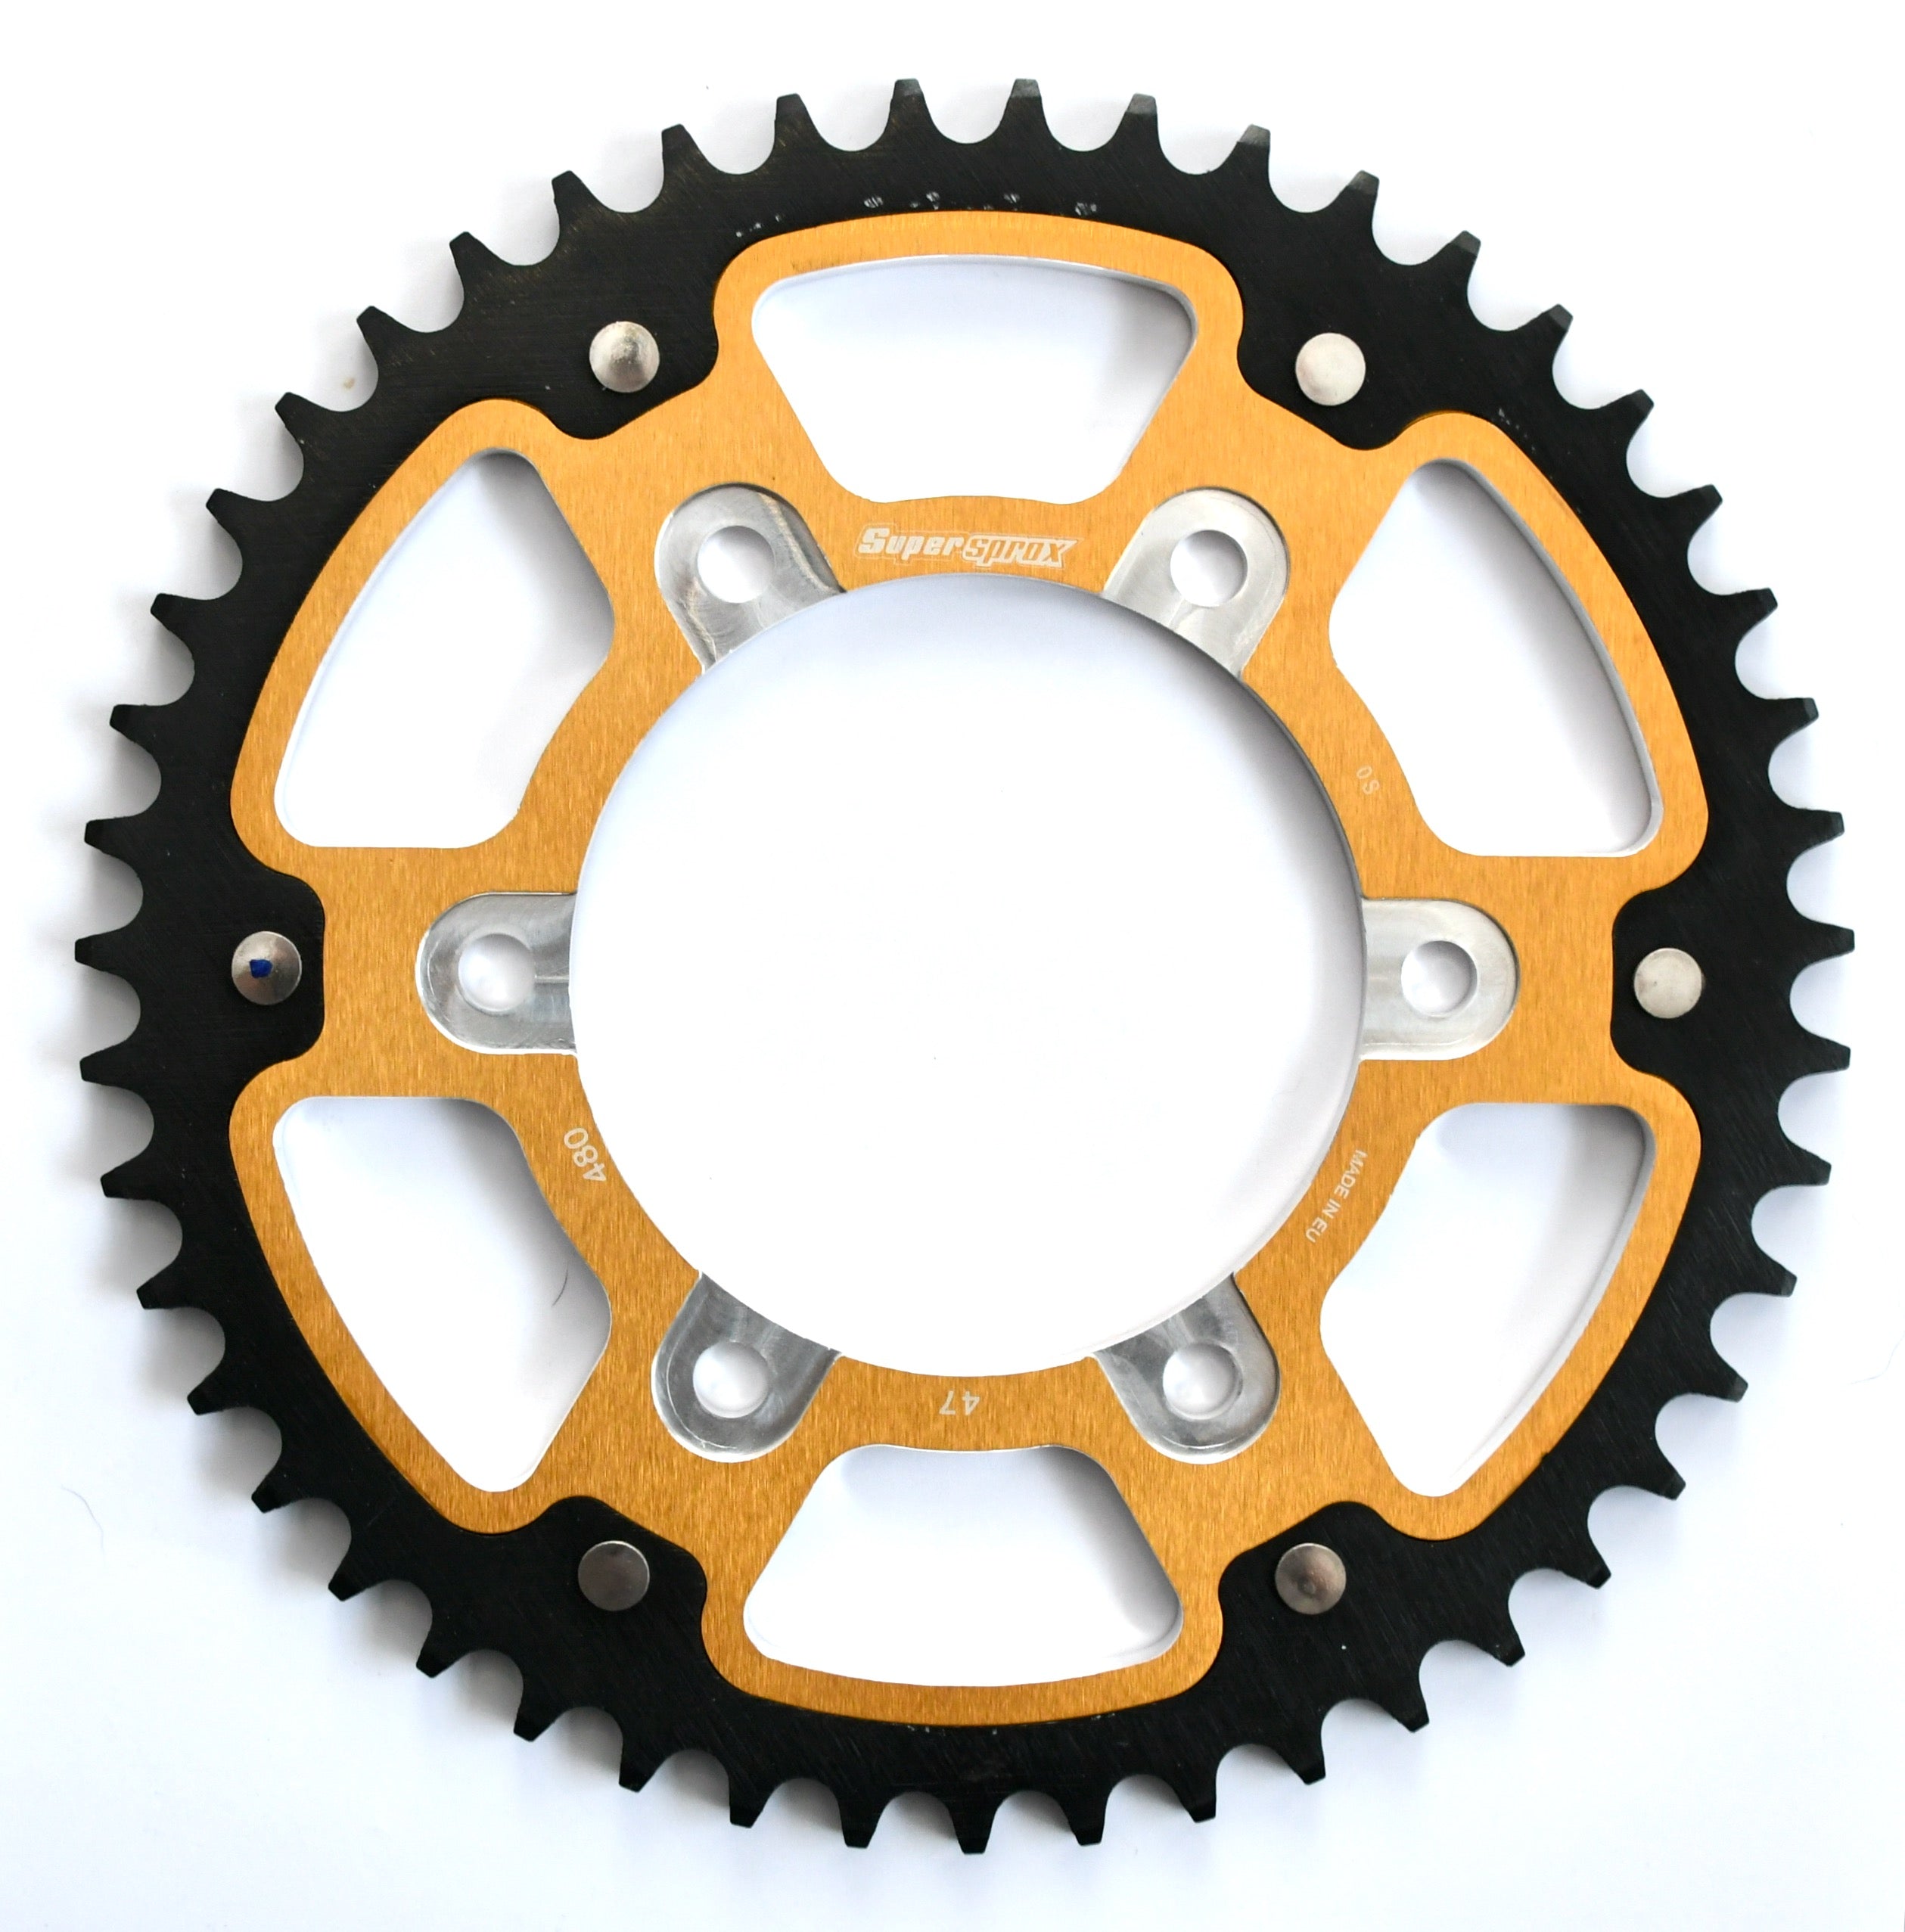 Supersprox Rear Sprocket RST-480 - Choose Your Gearing